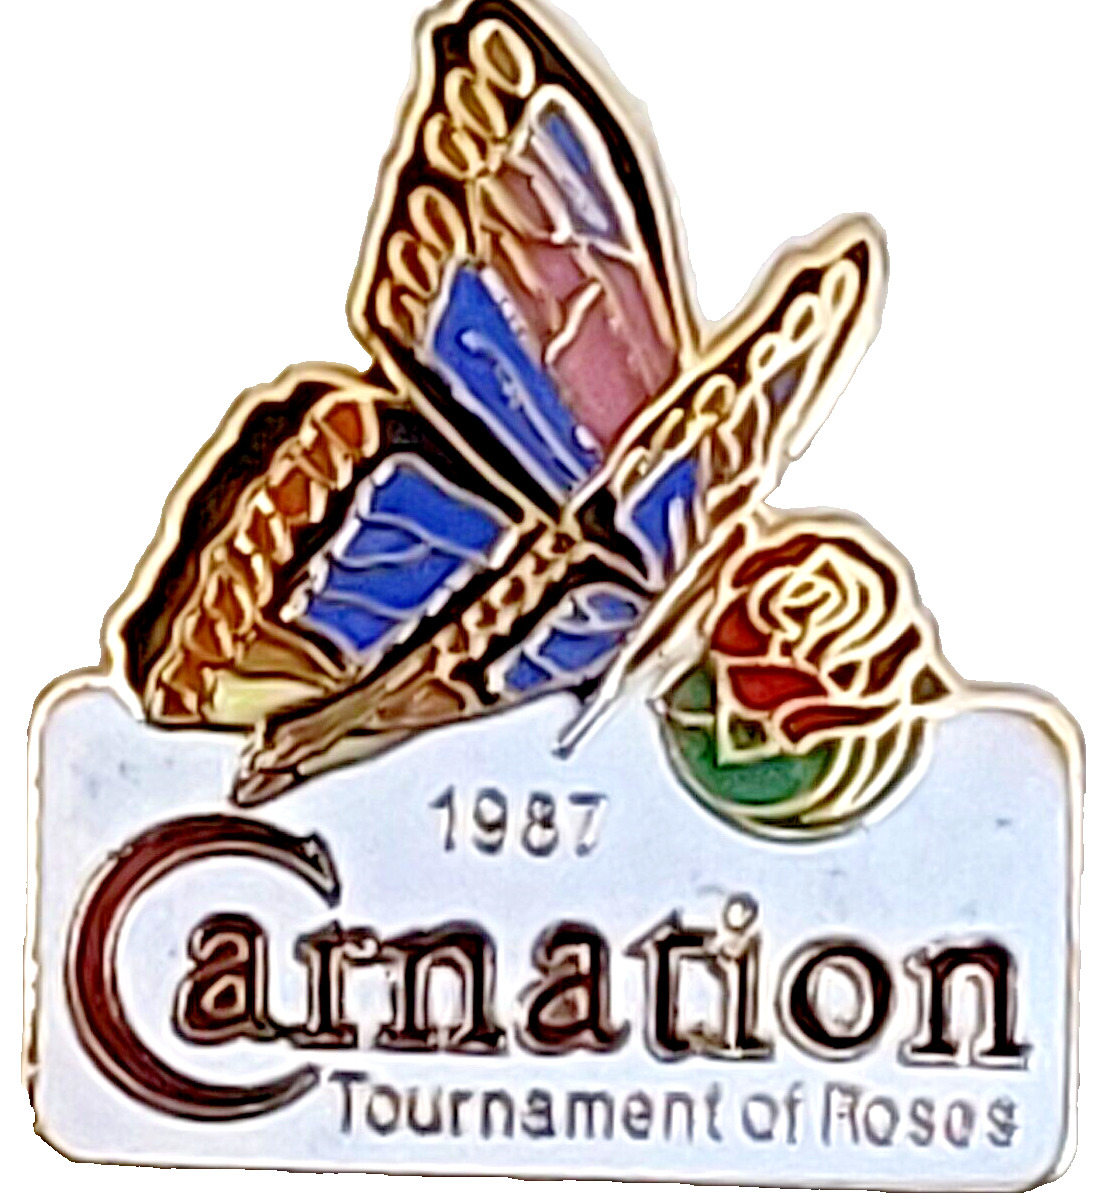 Rose Parade 1987 Carnation Company 98th Tournament of Roses Lapel Pin